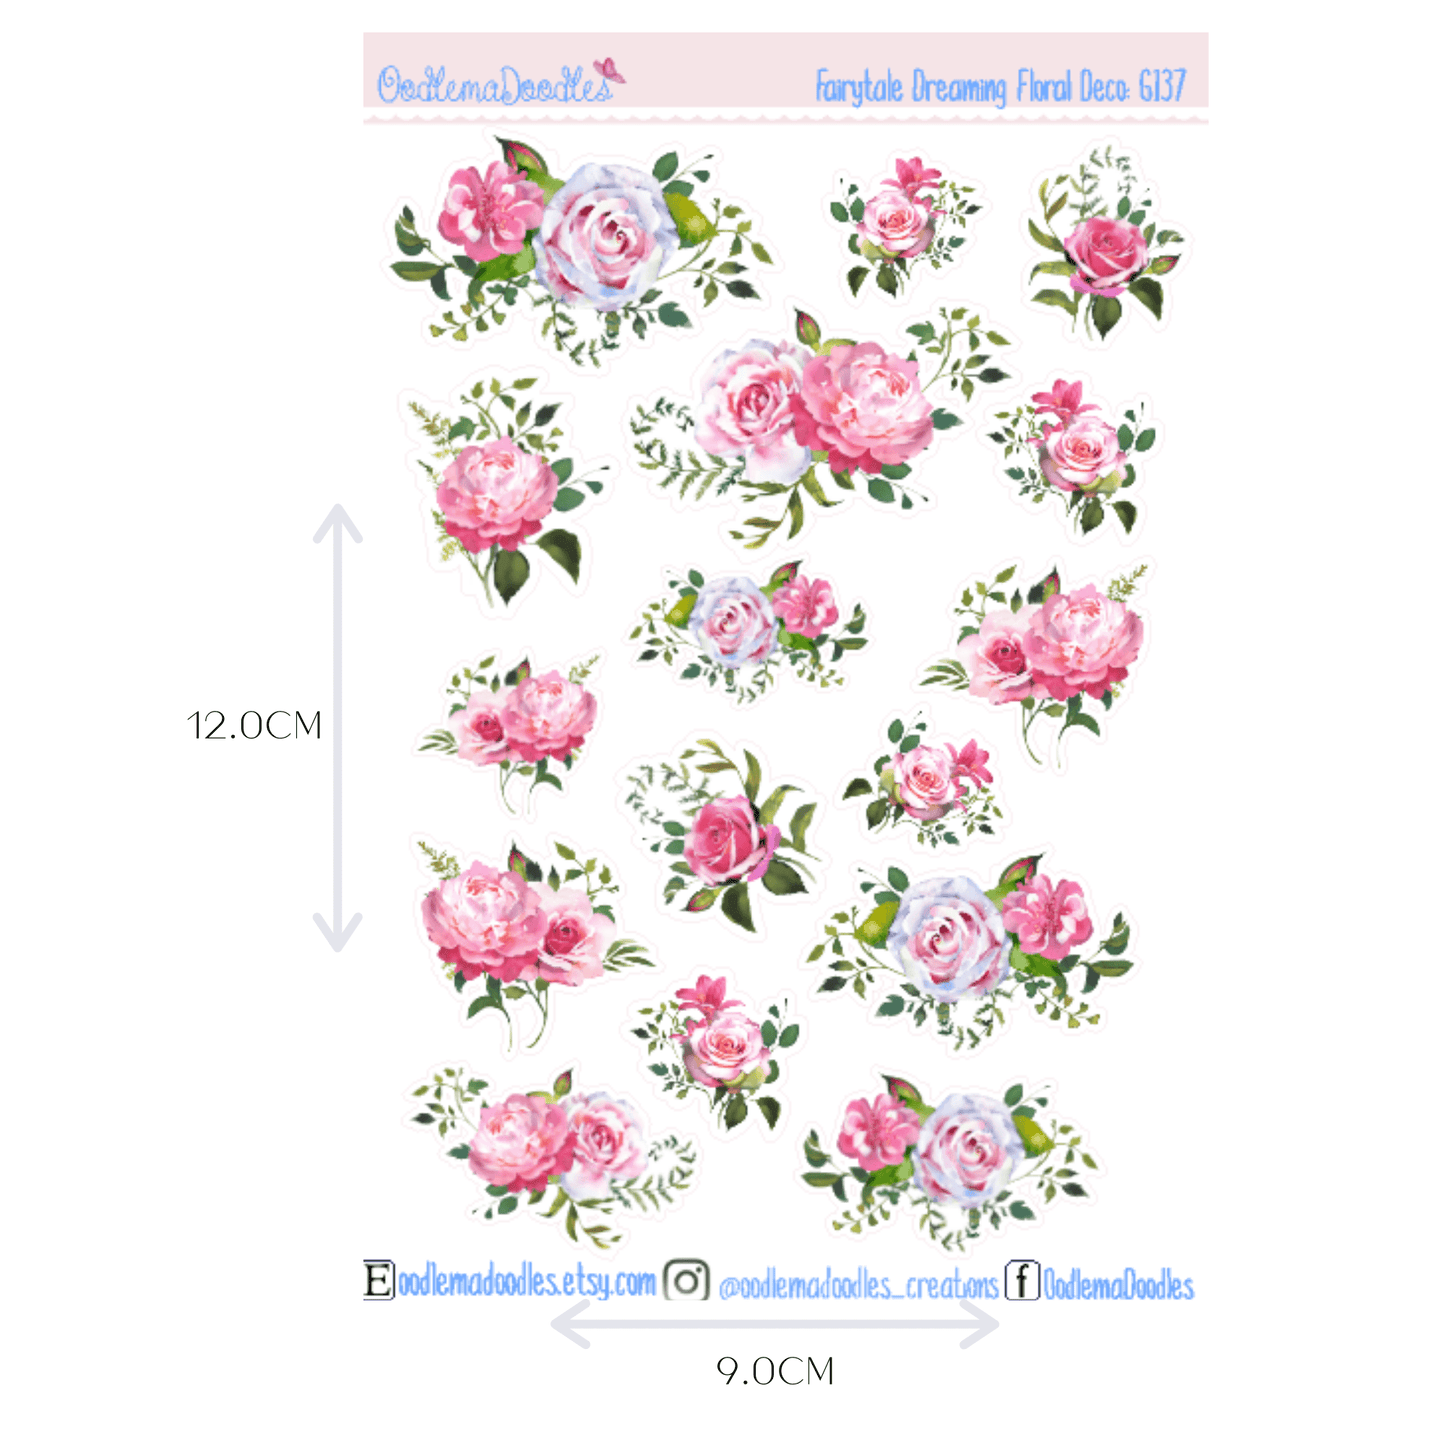 Fairytale Dreaming Floral Decorative Stickers